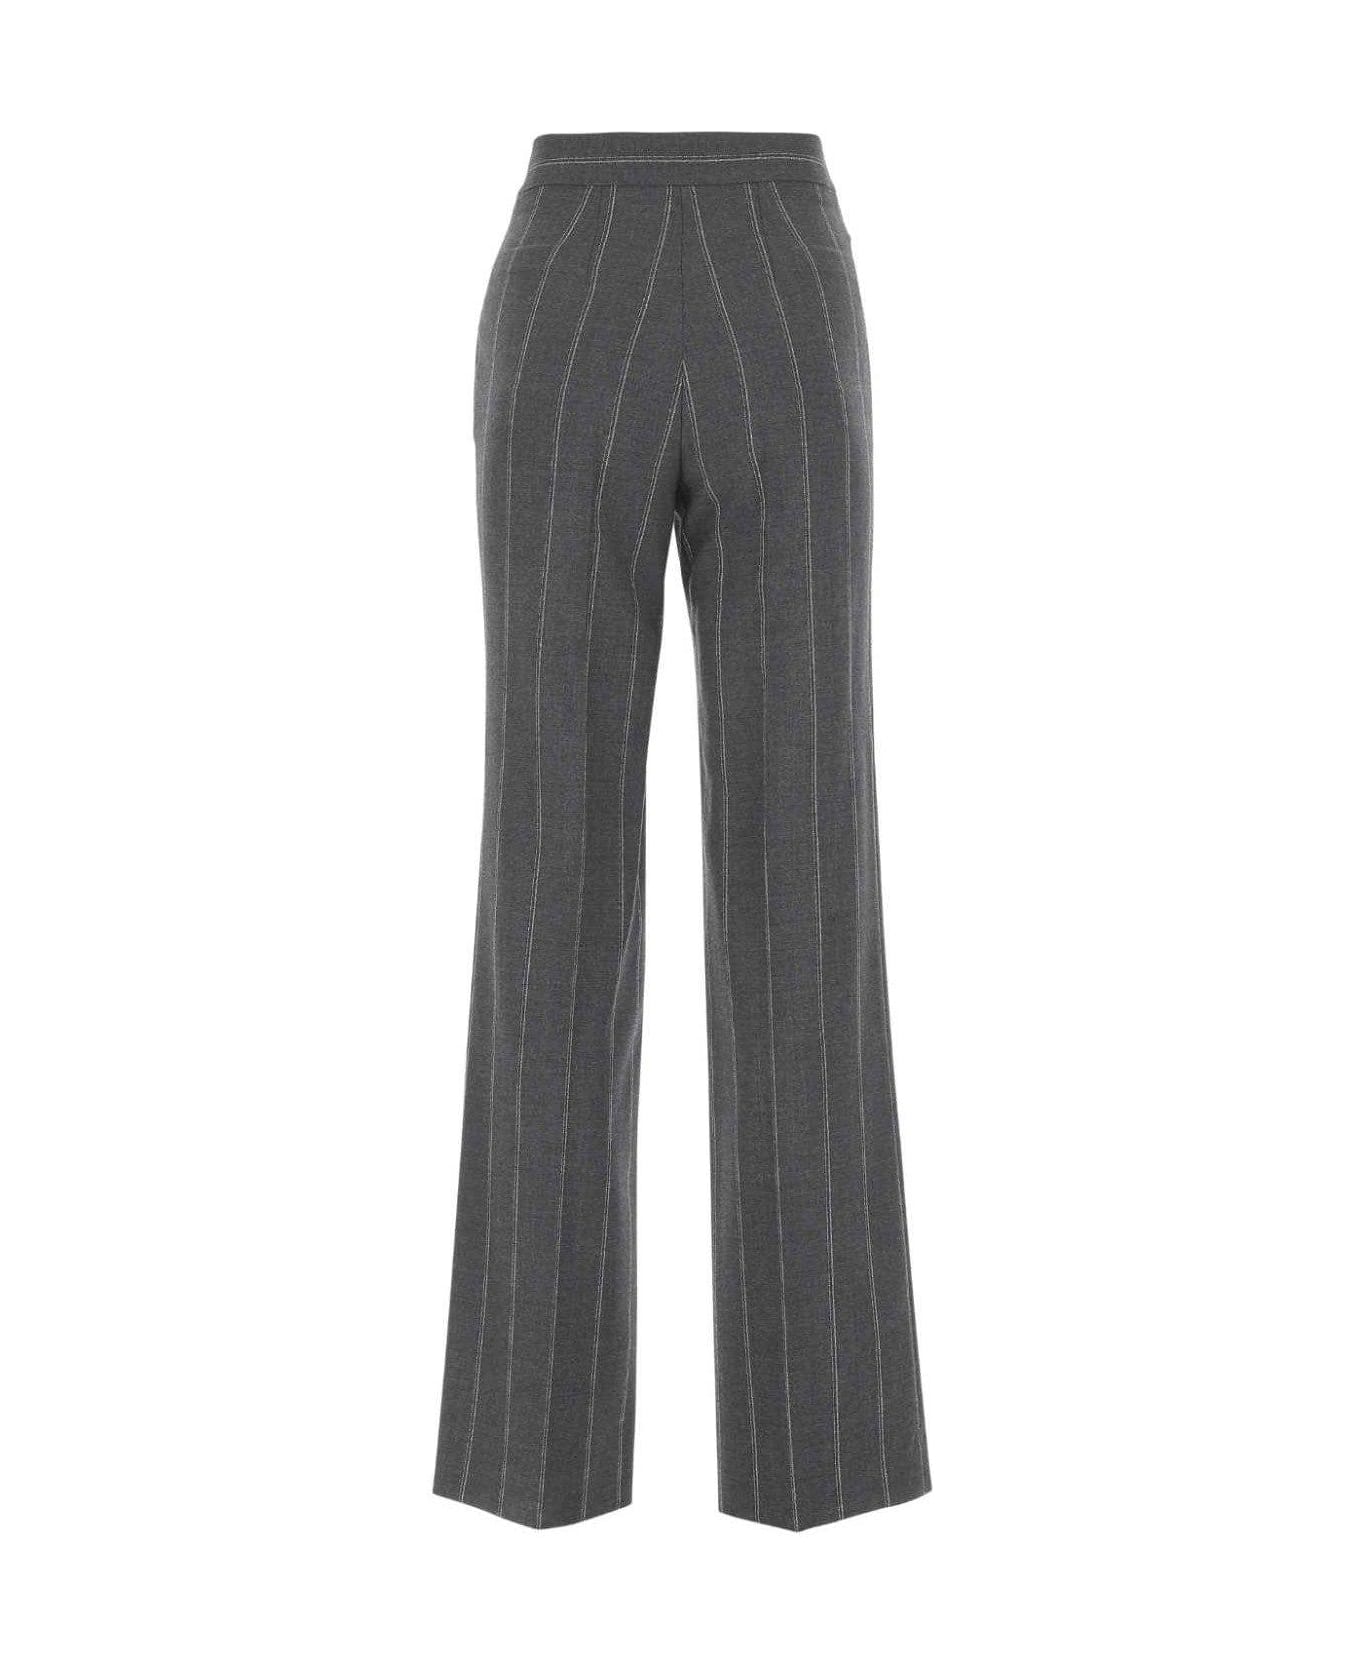 Stella McCartney Striped Tailored Trousers - Grey ボトムス